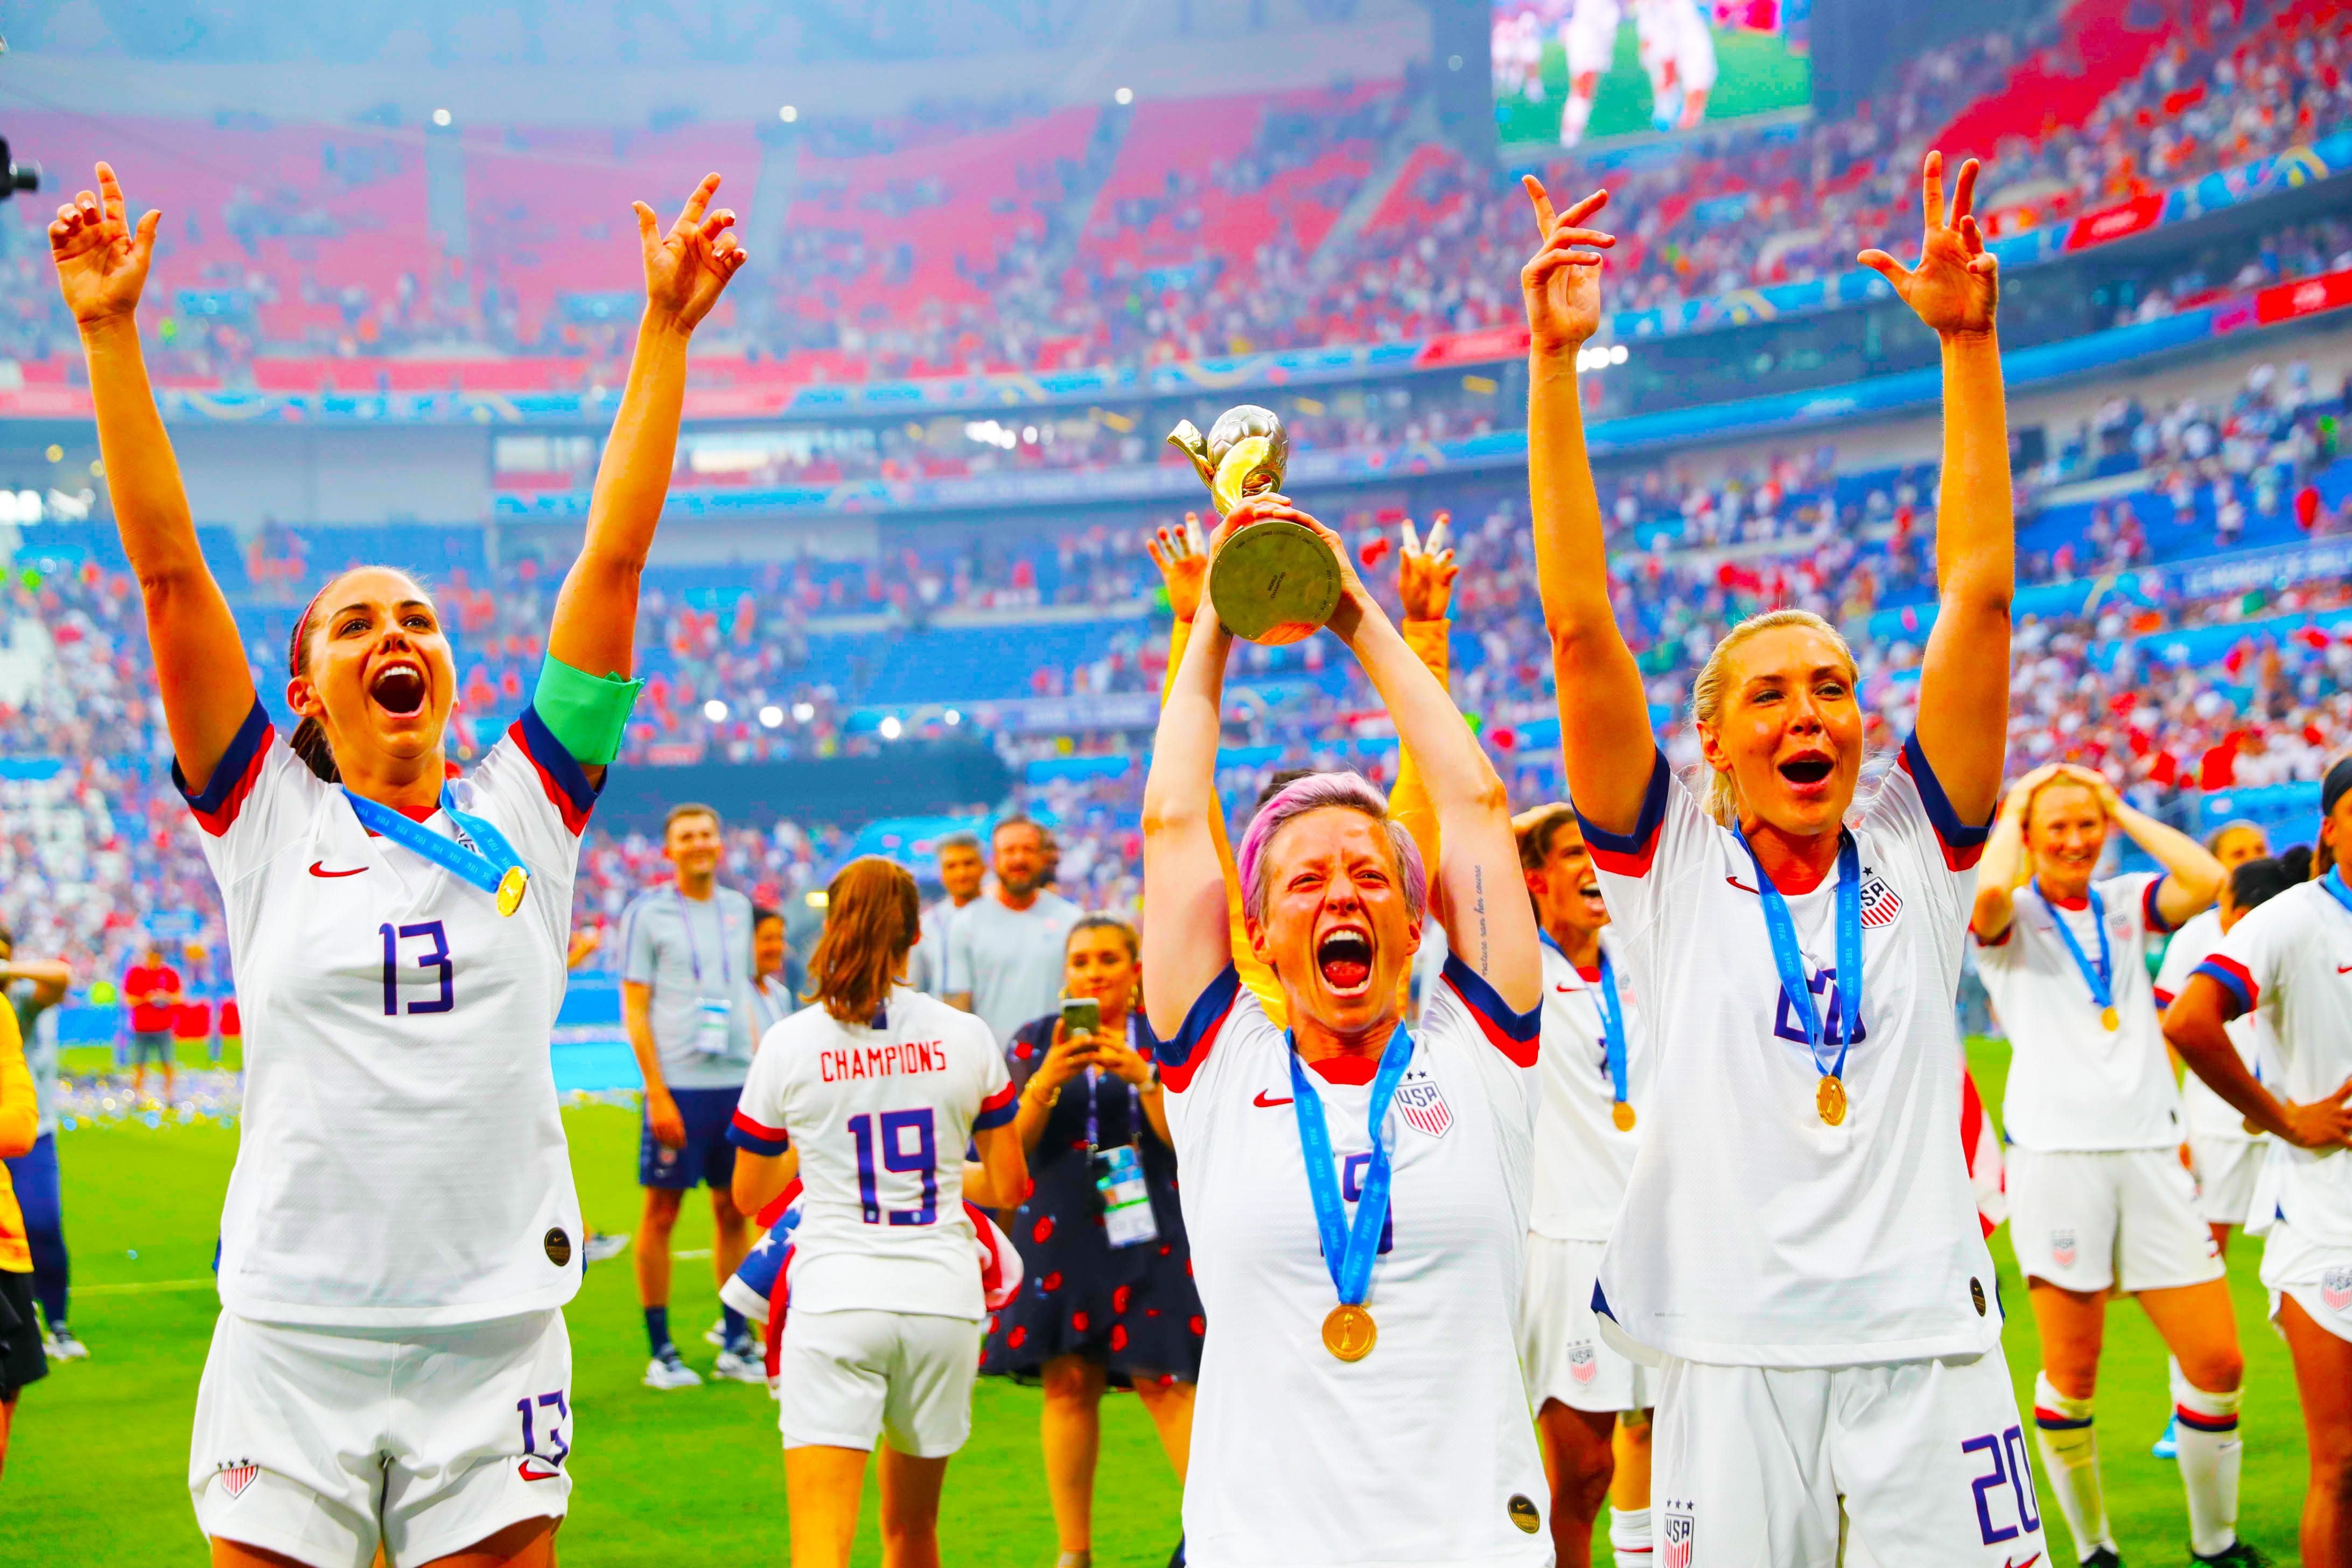 Uswnt Are Still Fighting For Equal Pay